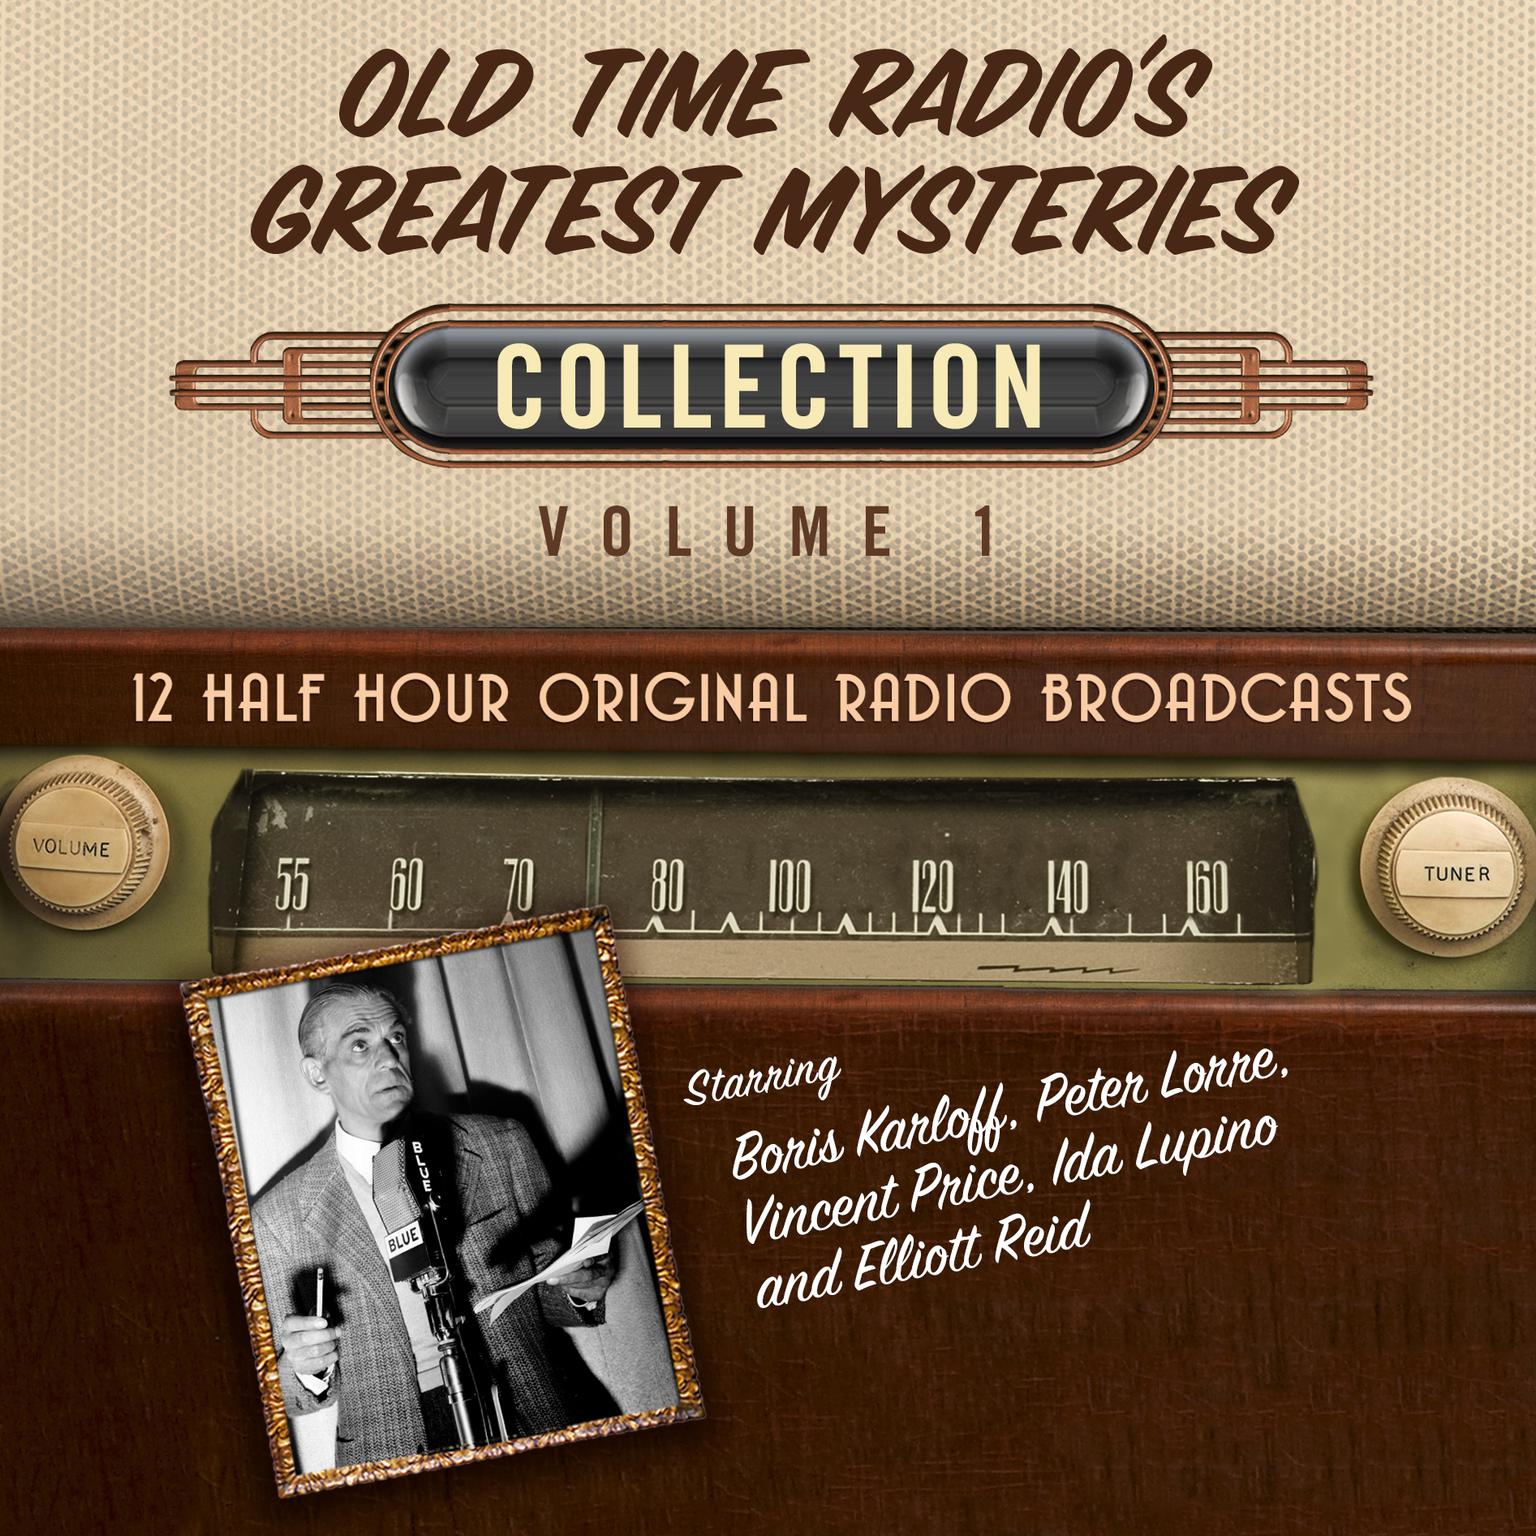 Old Time Radios Greatest Mysteries, Collection 1 Audiobook, by Black Eye Entertainment